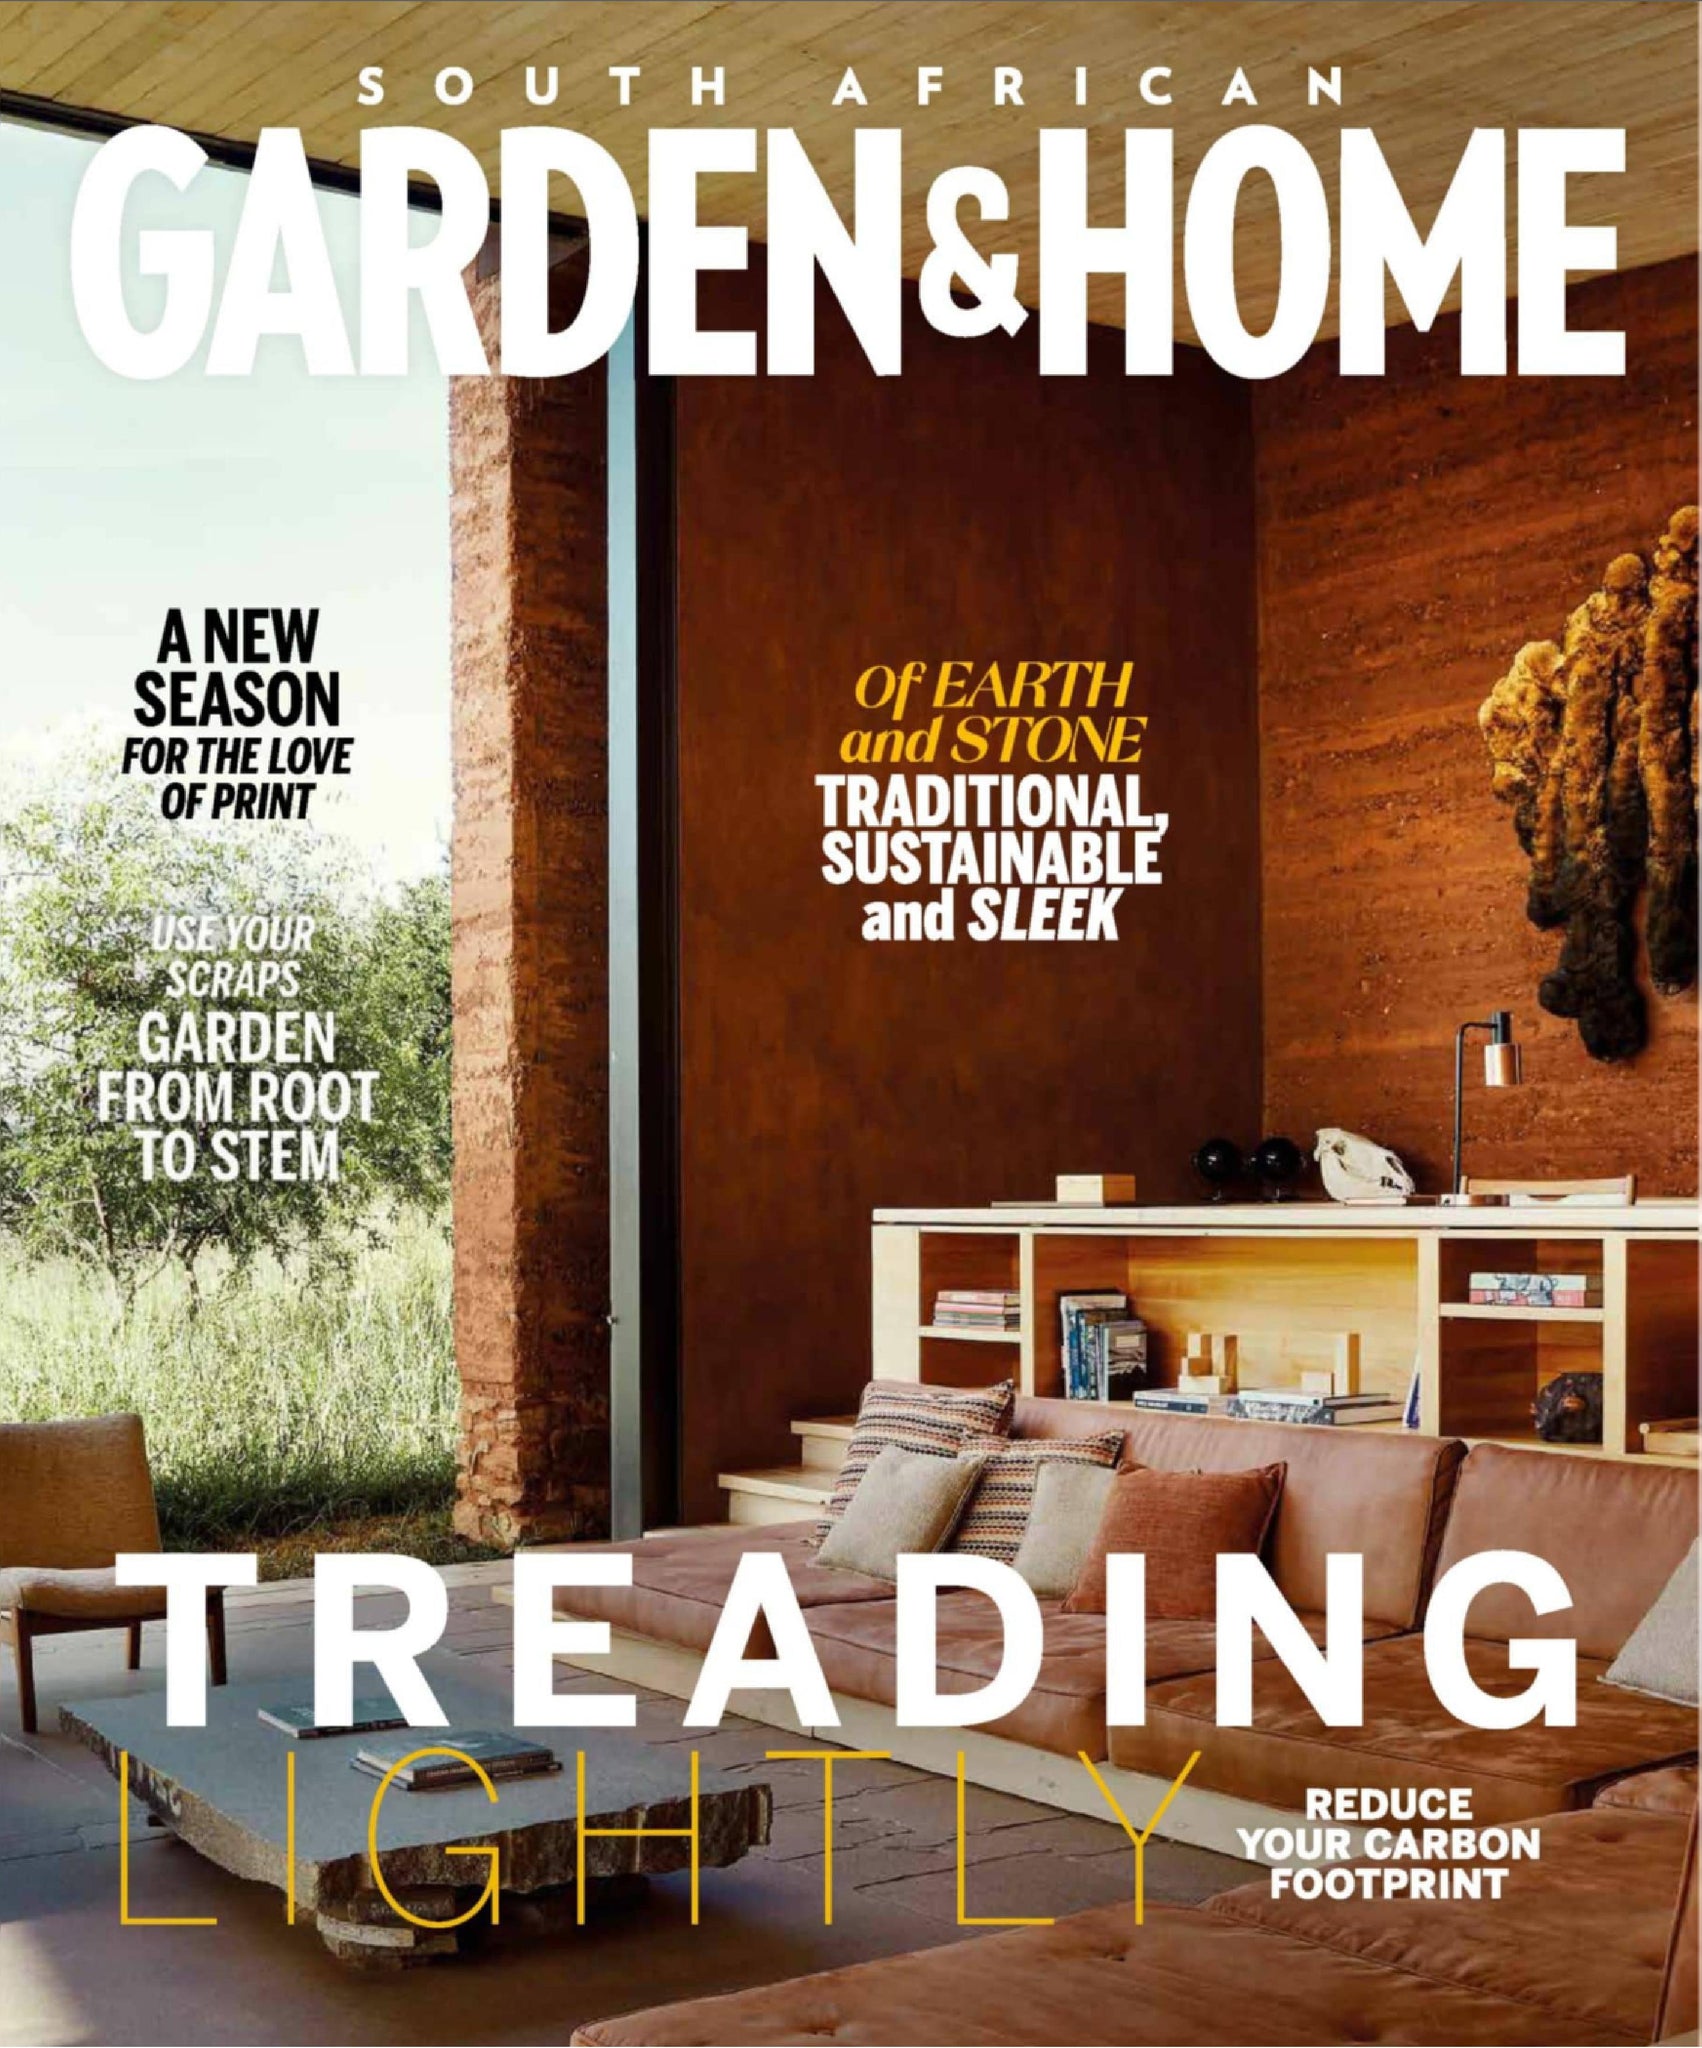 South African Garden and Home Magazine